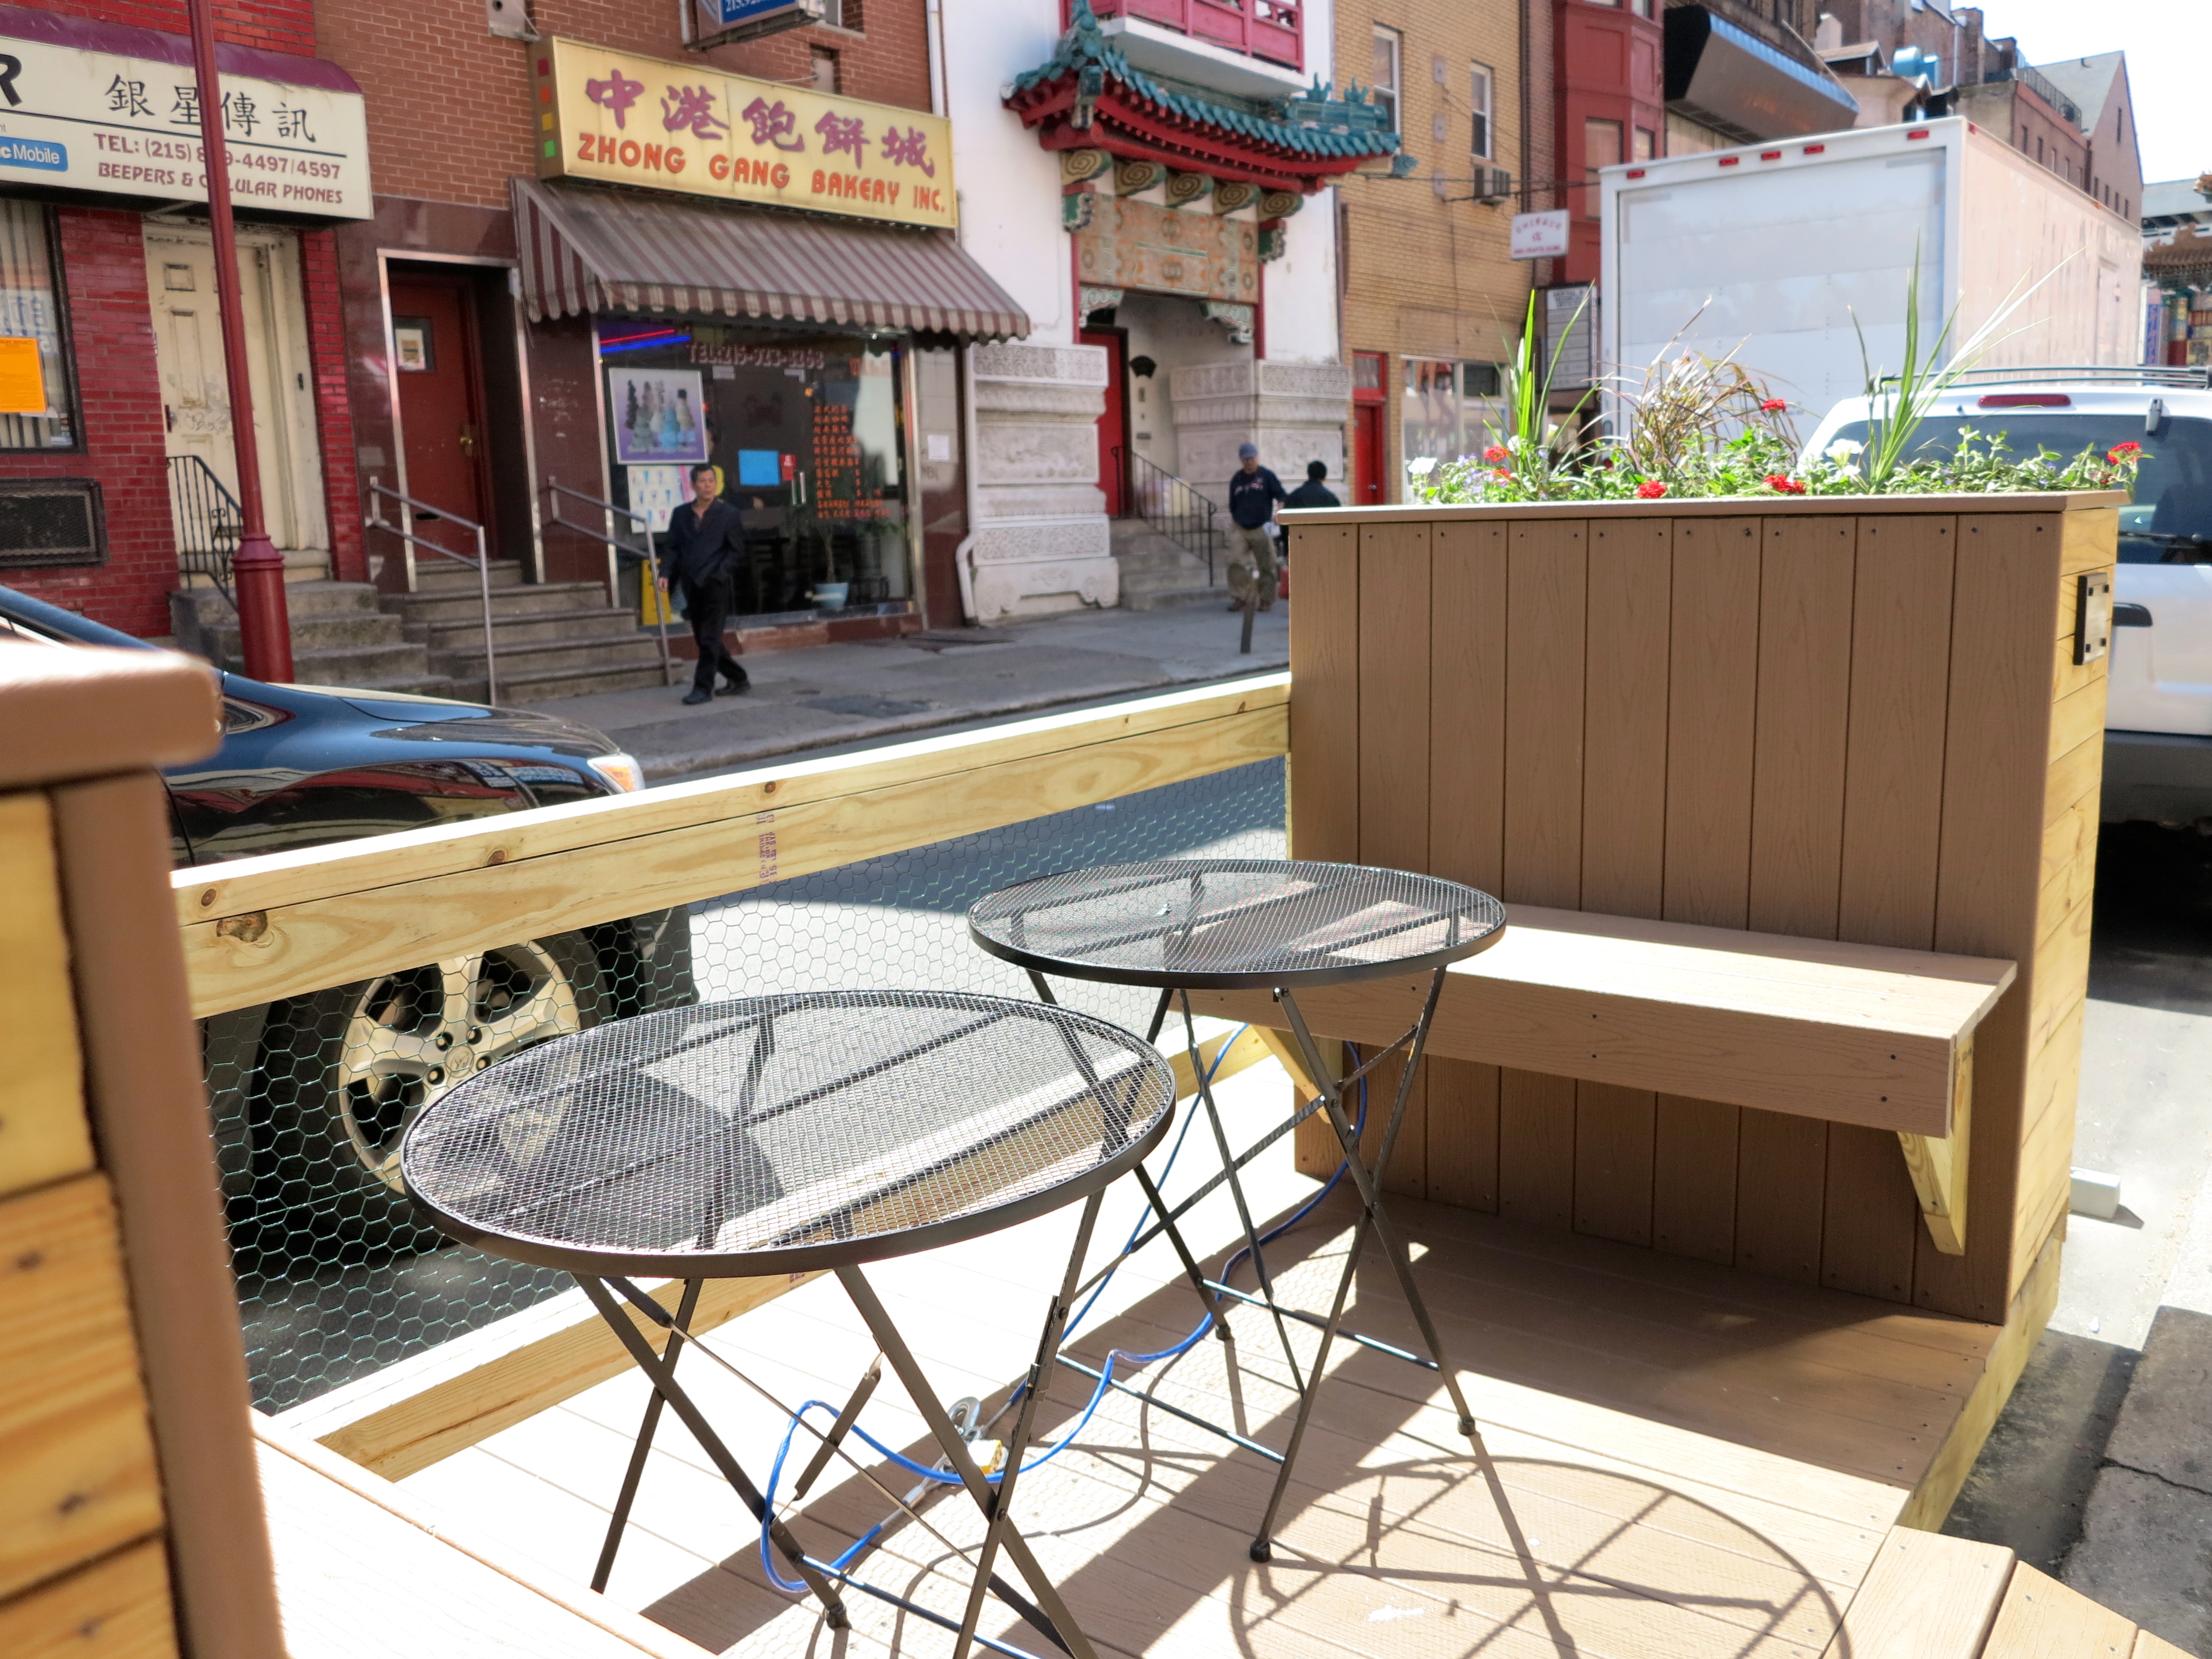 The parklet features built-in benches and two tables.